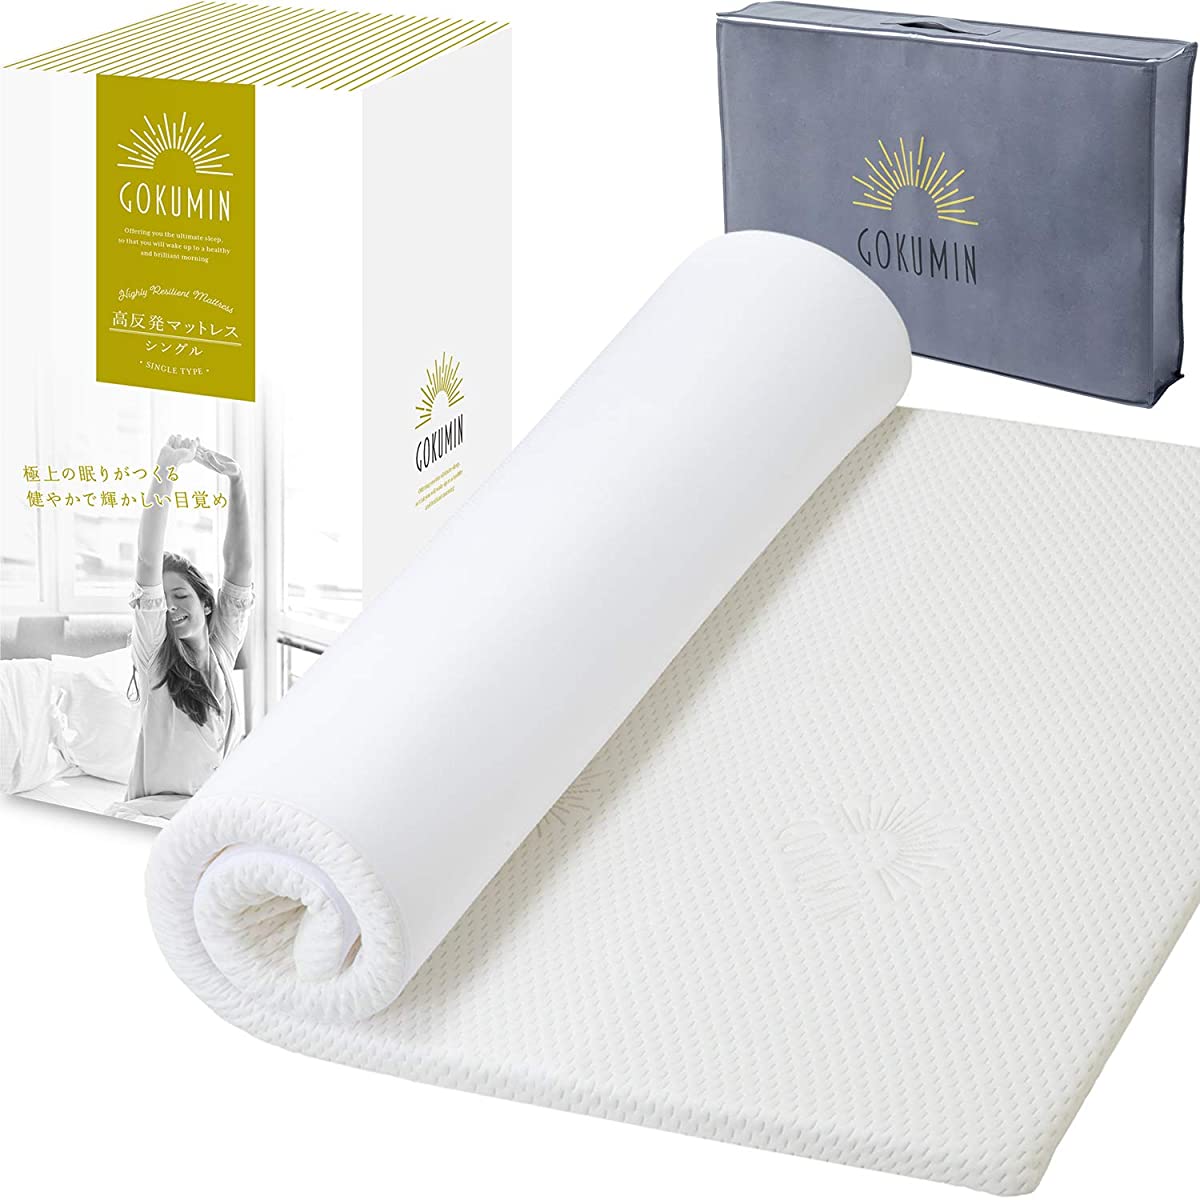 GOKUMIN Mattress Bed Mat, Mattress, Thick, 1.6 inches (4 cm) (Unique High  Resilience, Antibacterial and Odor Resistant Processed Mattress for Easy  Use